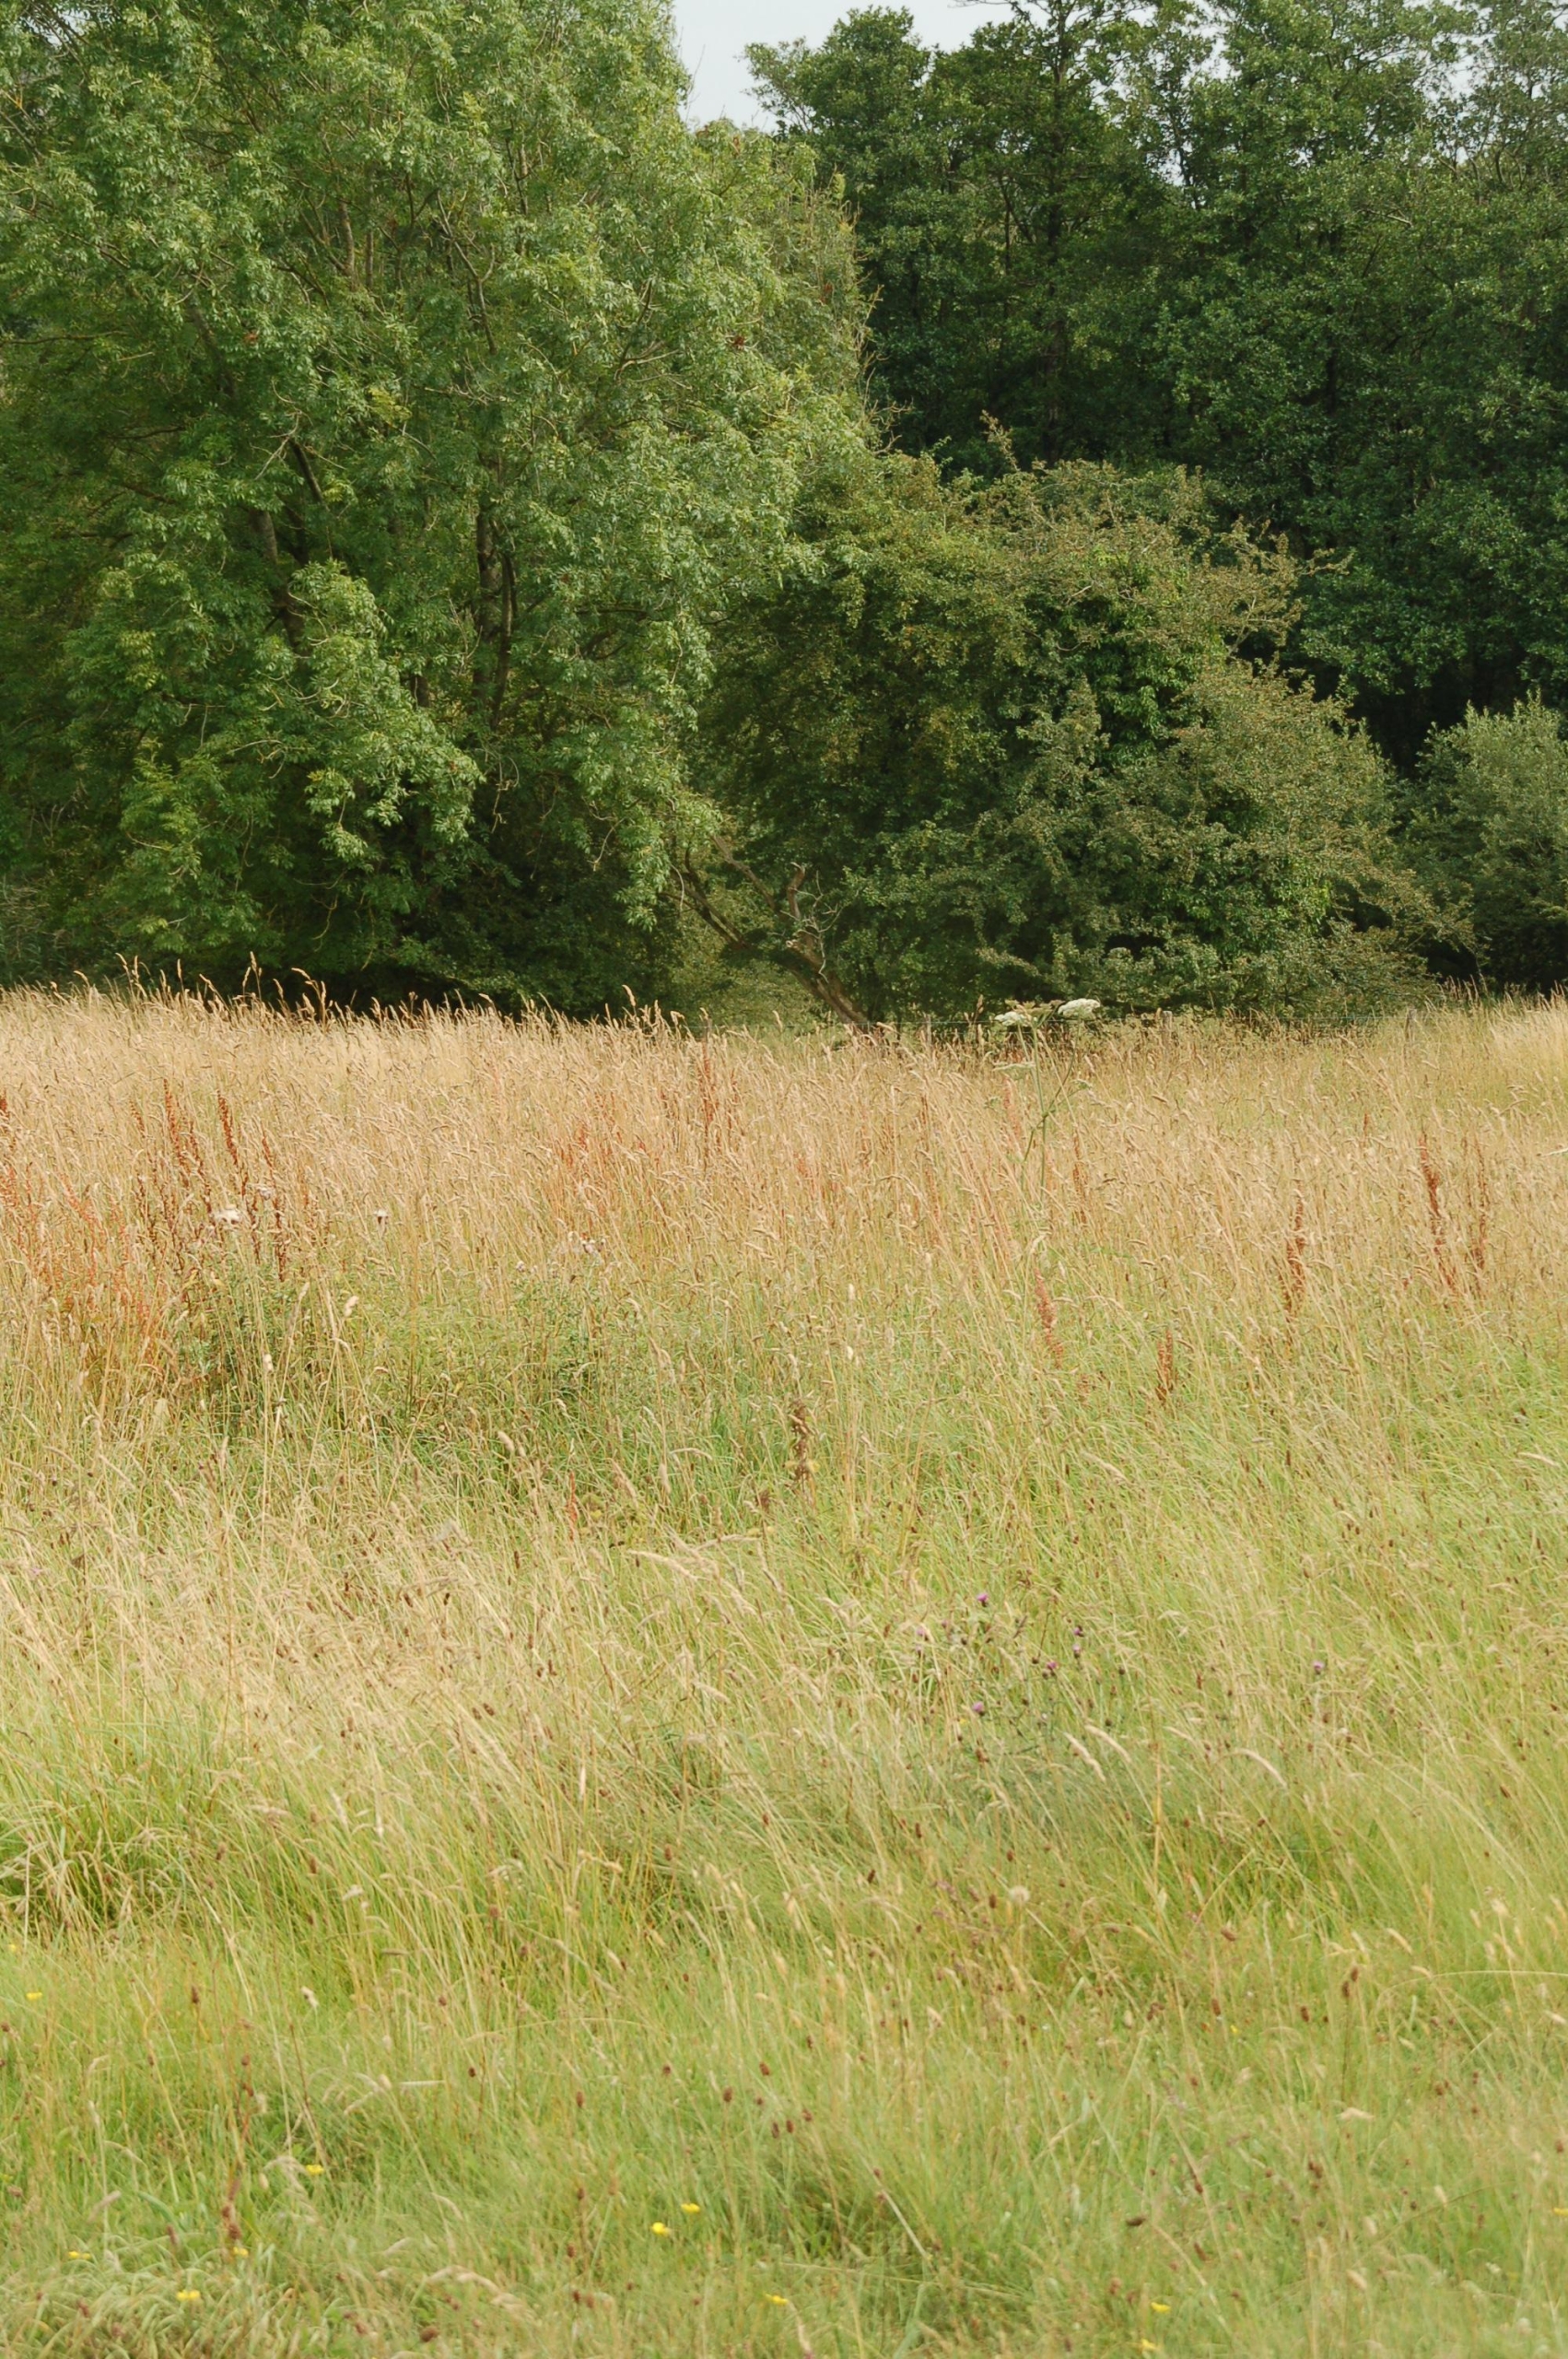 Grassland scrub and woodland at Gait Barrows National Nature Reserve